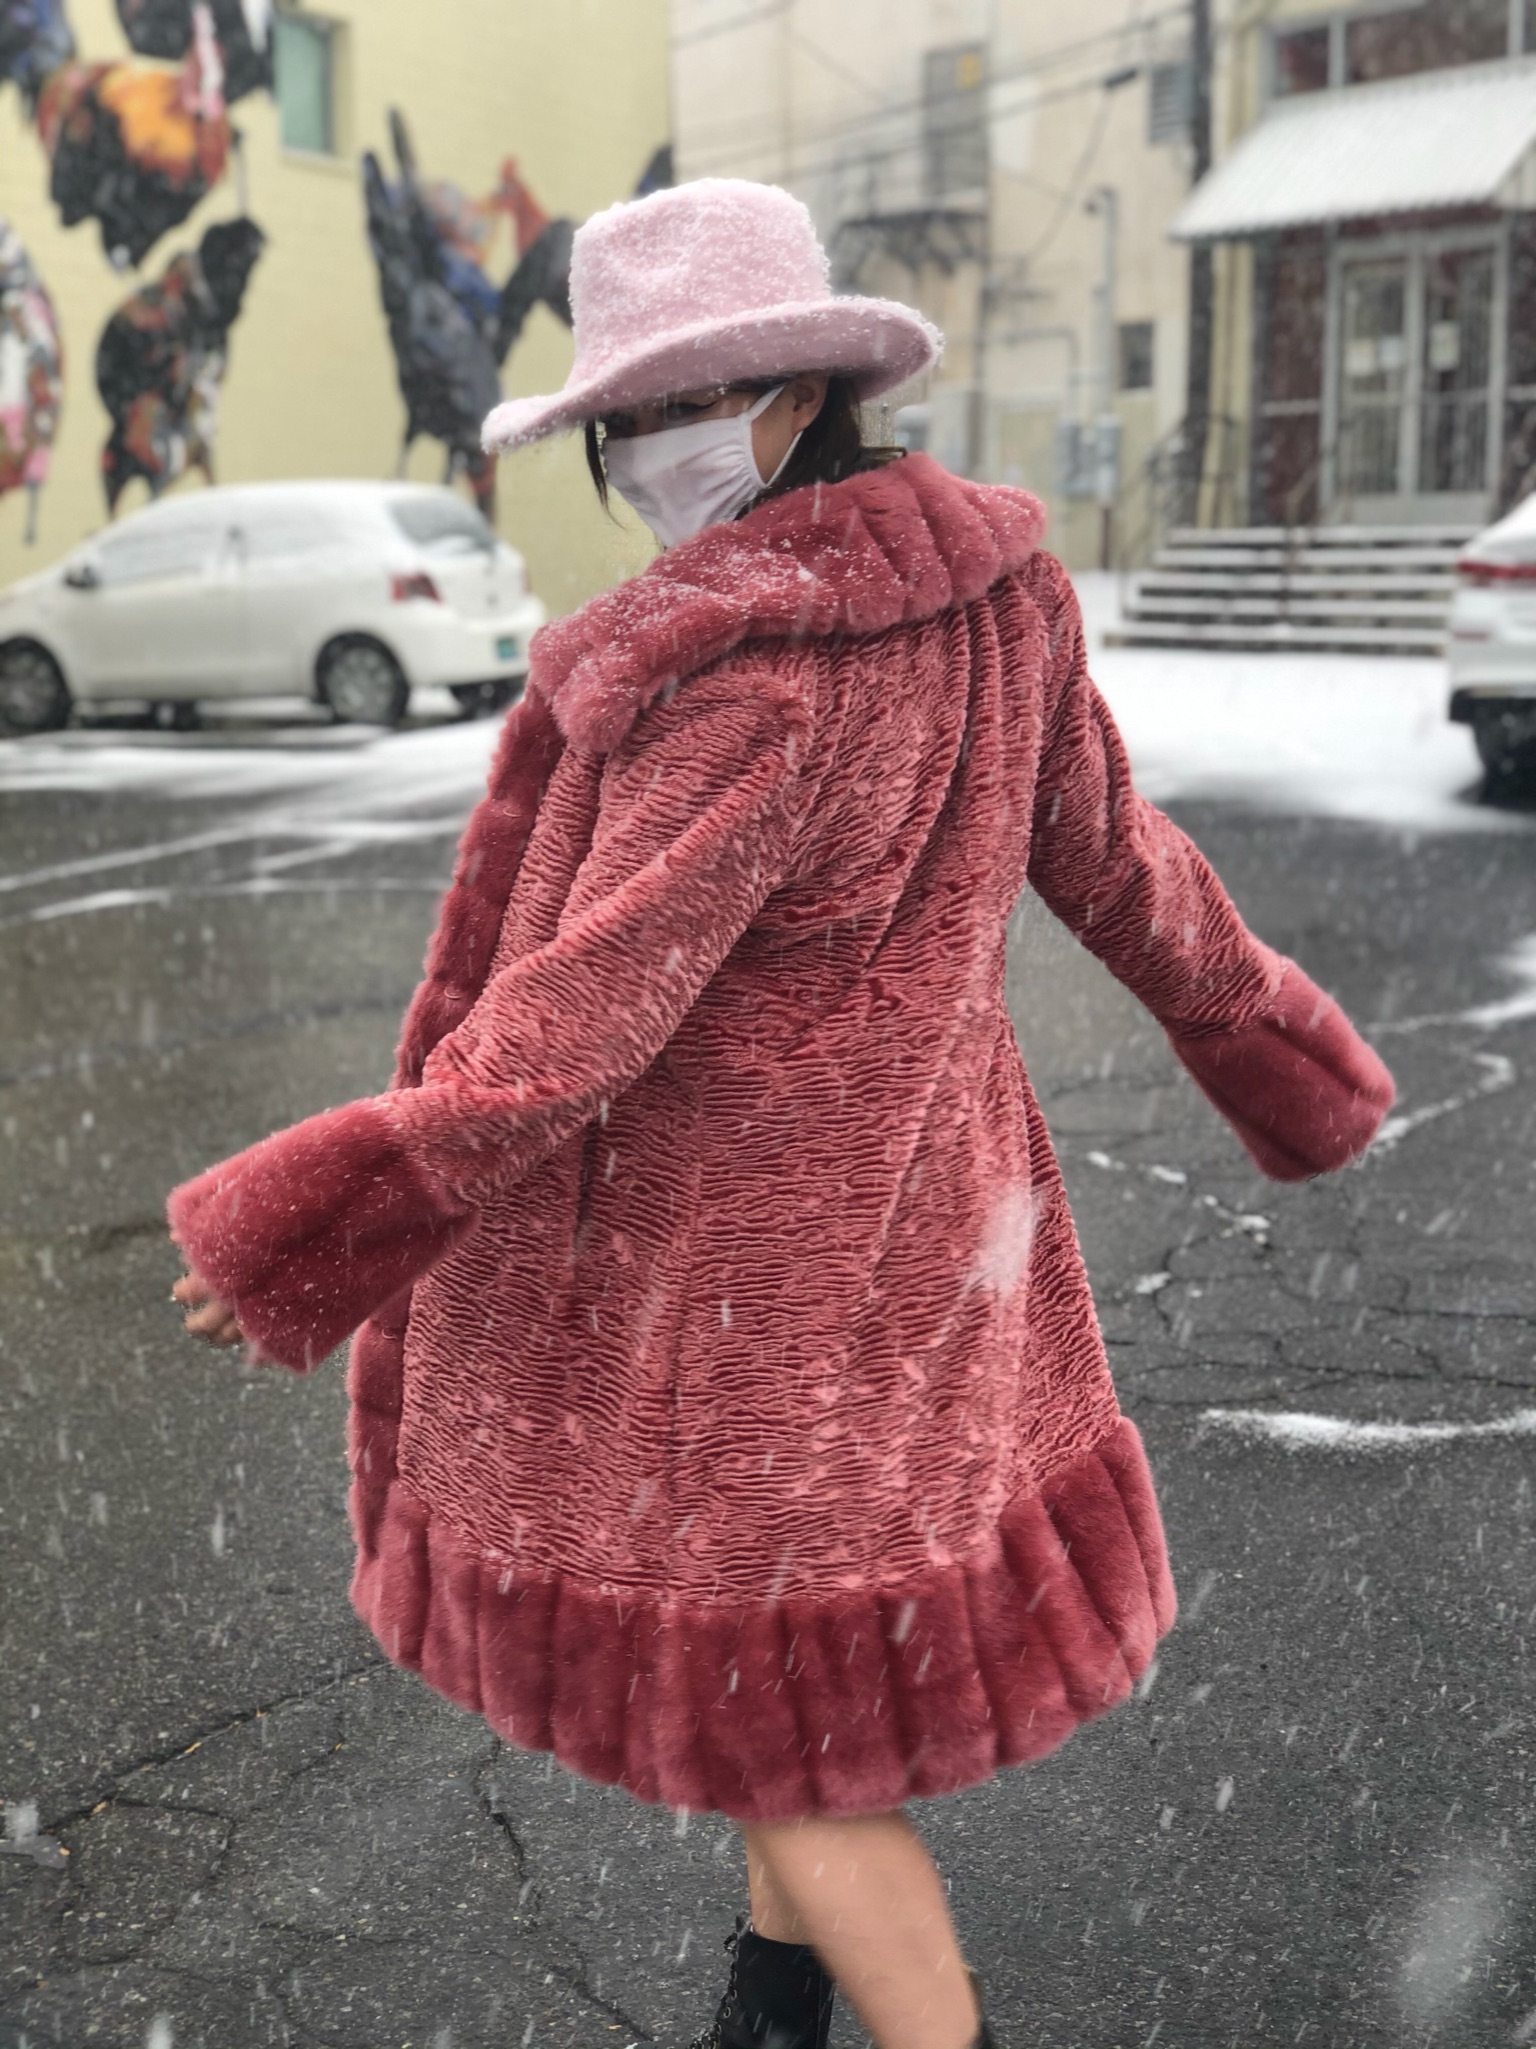 A person wearing a pink fur coat and pink fuzzy cowgirl hat in the snow